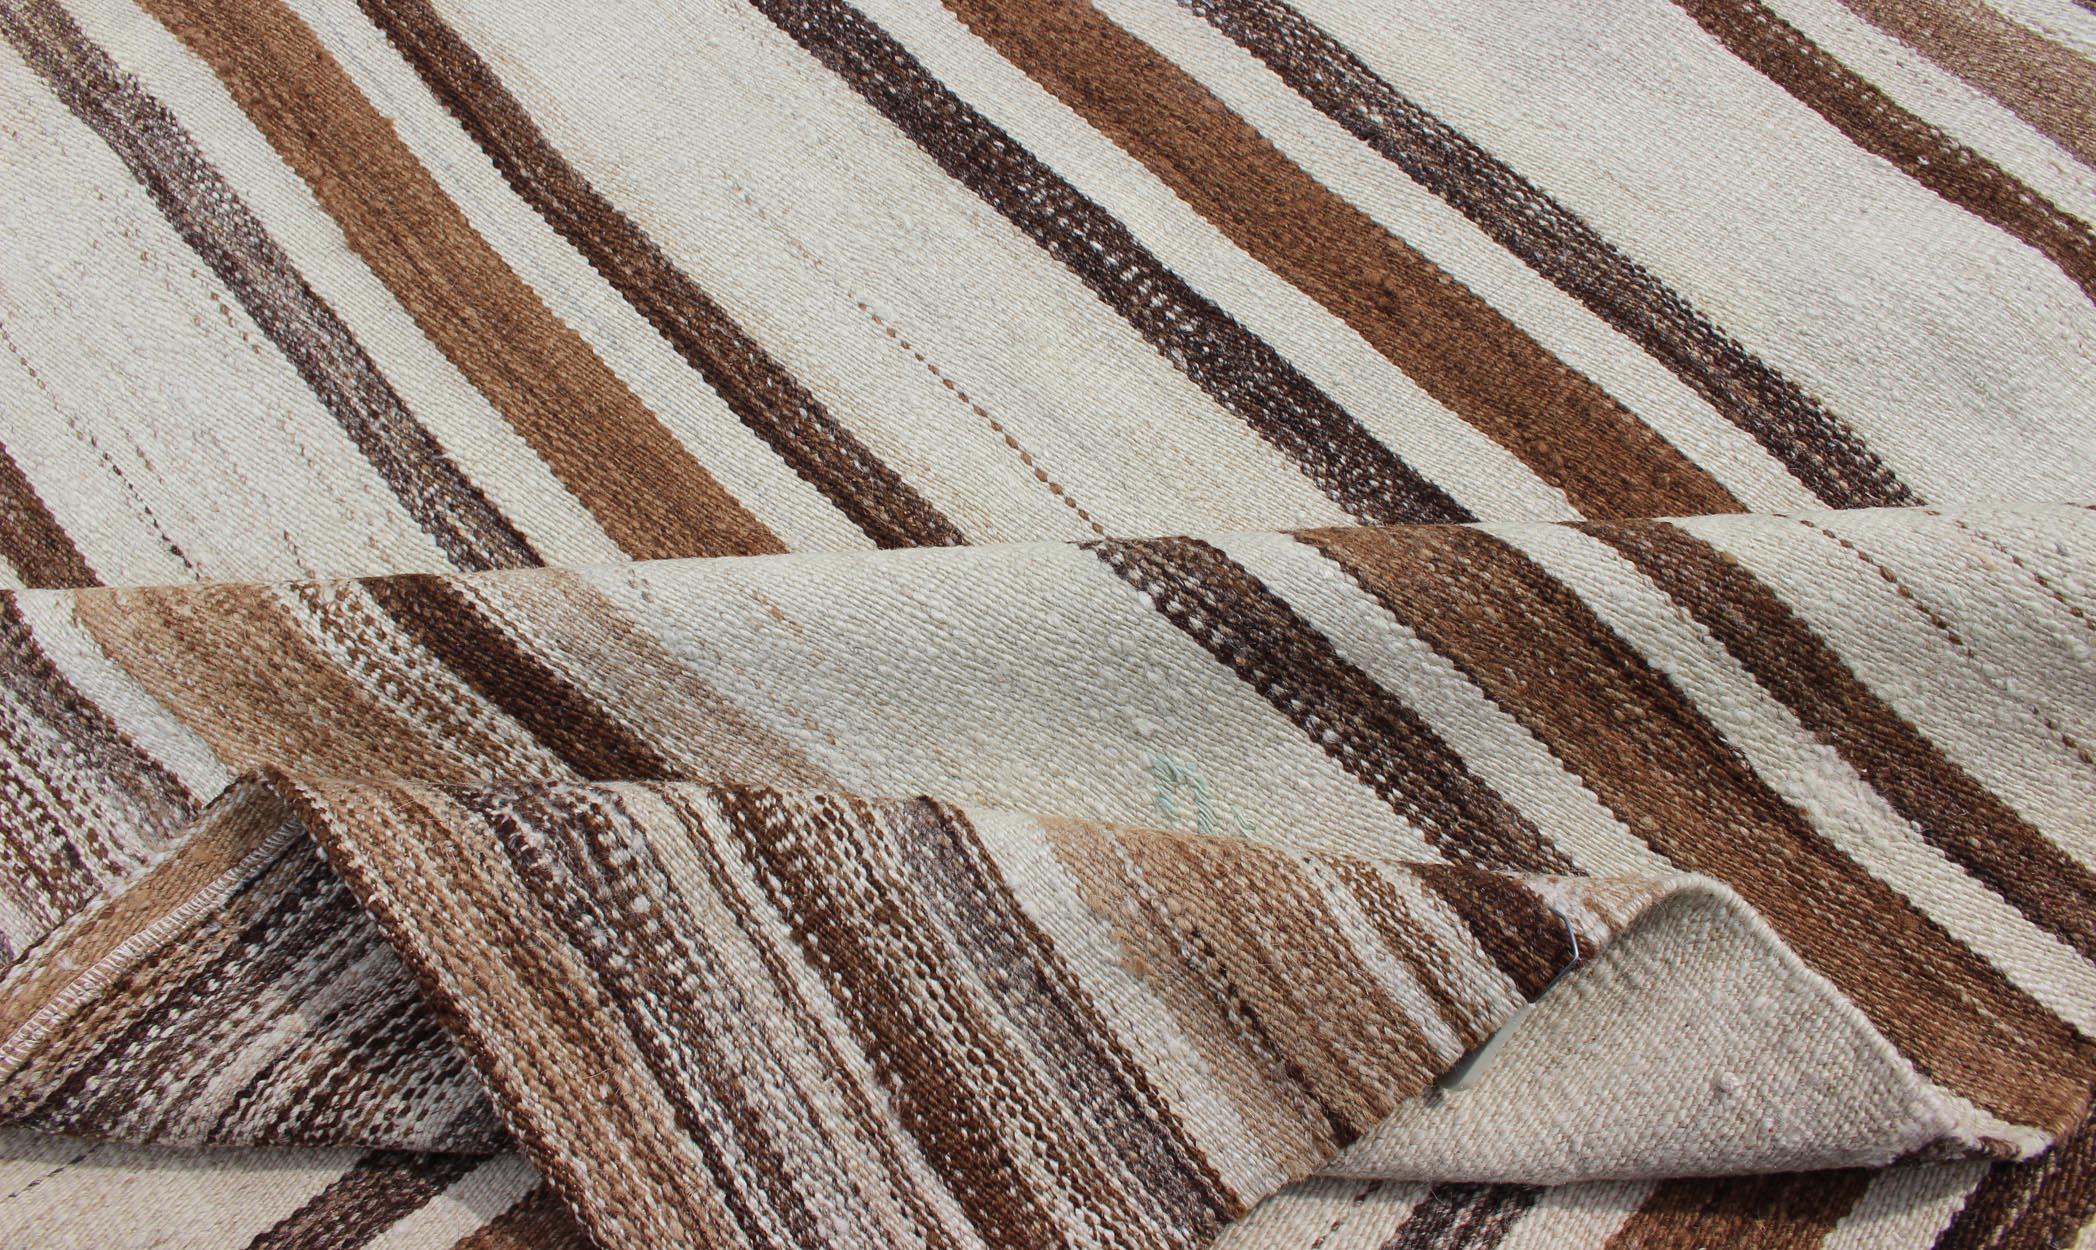 Striped Turkish Vintage Kilim Flat-Weave Rug in Shades of Browns Taupe and Ivory For Sale 6